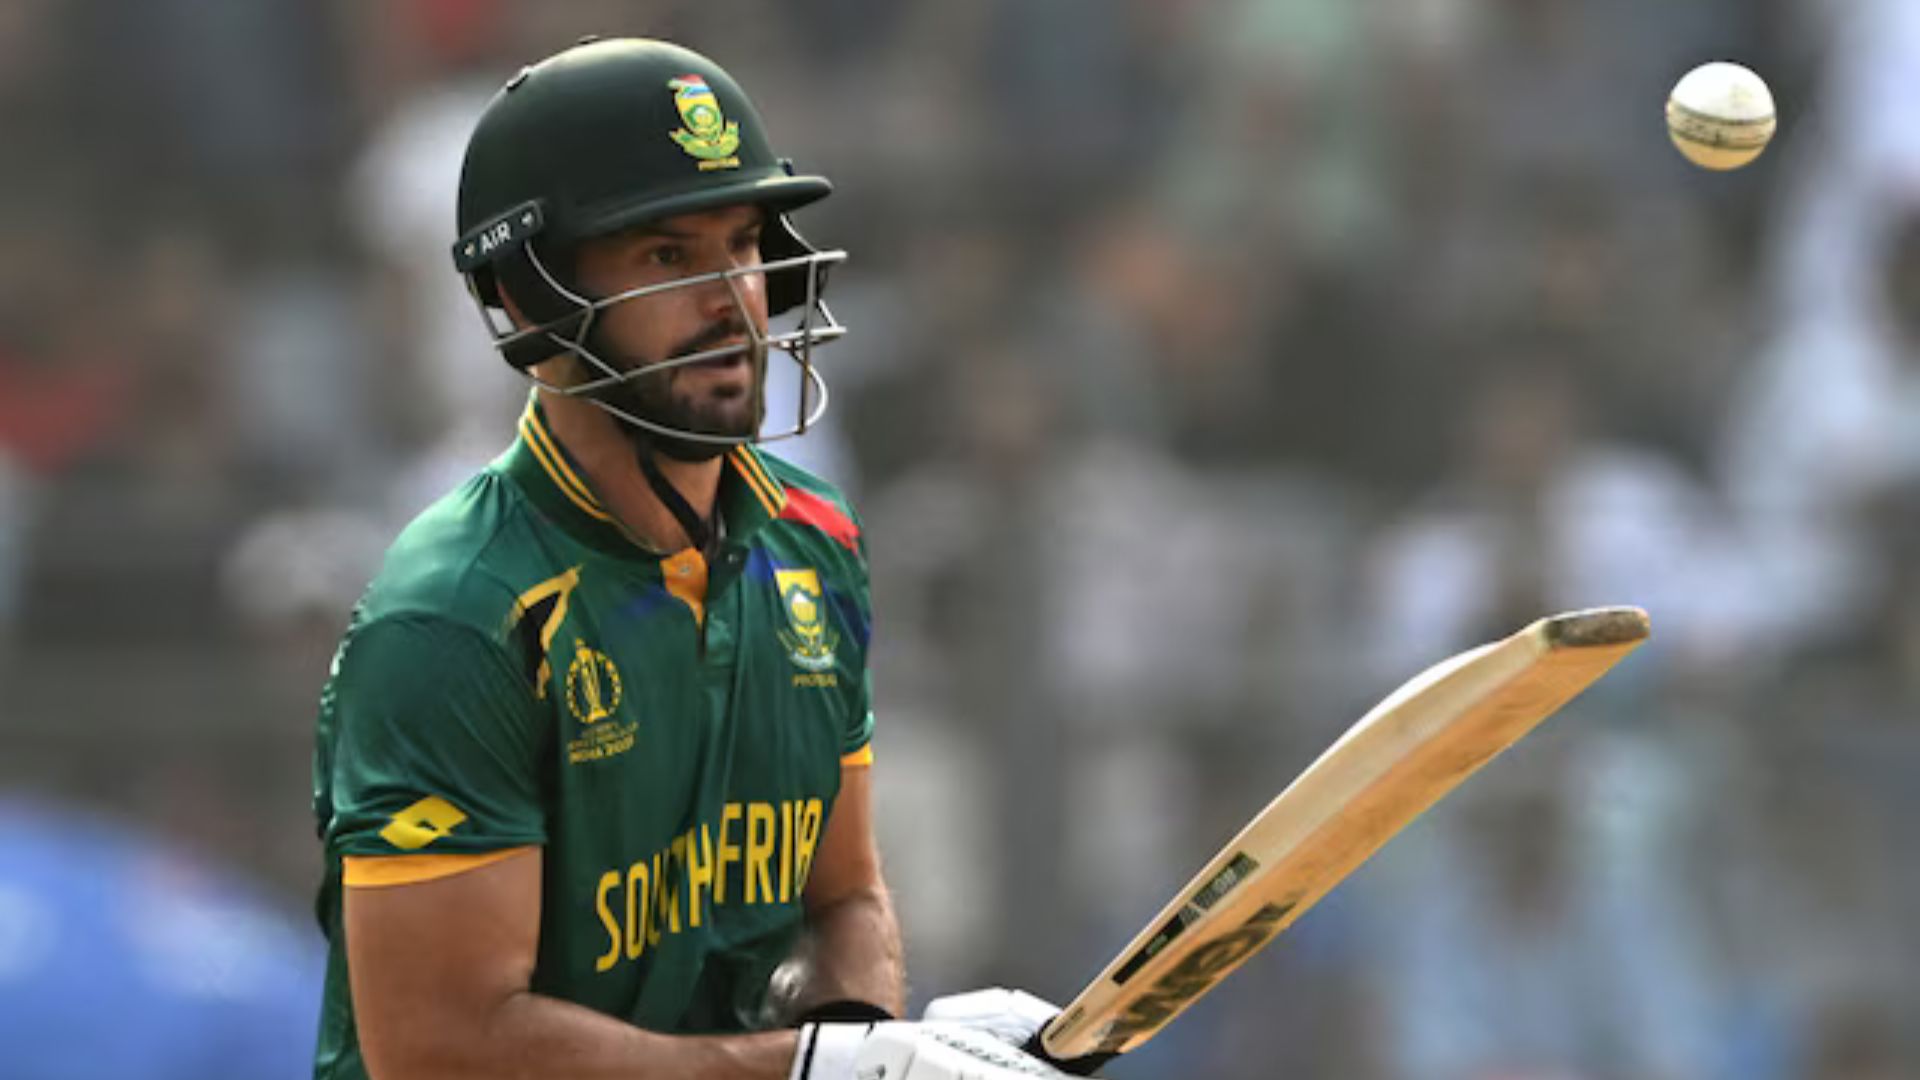 “Lot of Relief to Reach Semifinals”: SA Skipper Aiden Markram After T20 WC Super 8 Victory